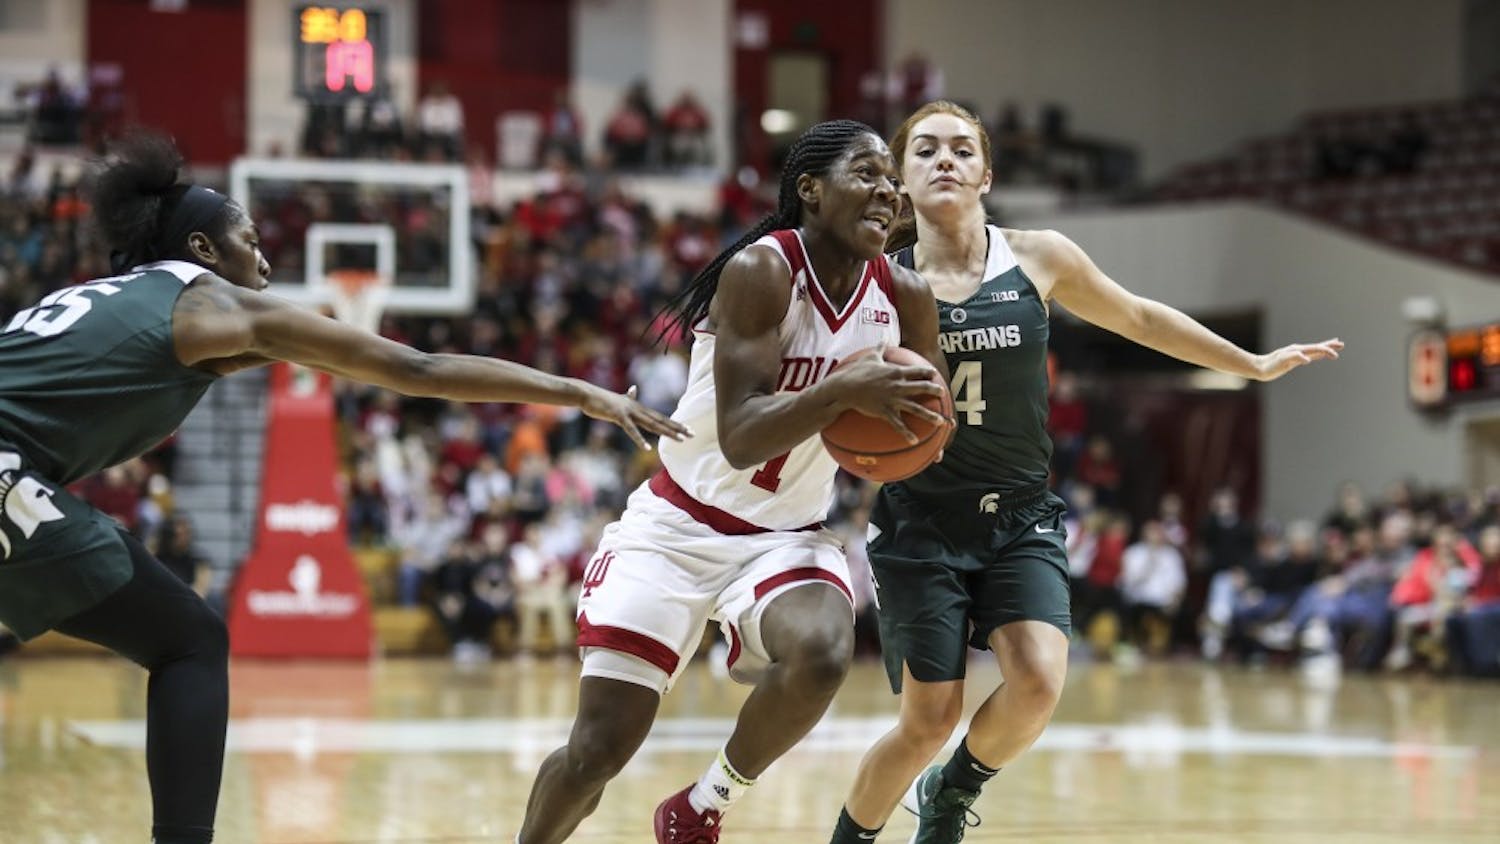 Then-freshman guard Bendu Yeaney charges the basket during the IU's game against Michigan State on Dec. 28, 2017, at Simon Skjodt Assembly Hall. Since losing 68-46 in this game, the Hoosiers have won two straight against the Spartans.&nbsp;